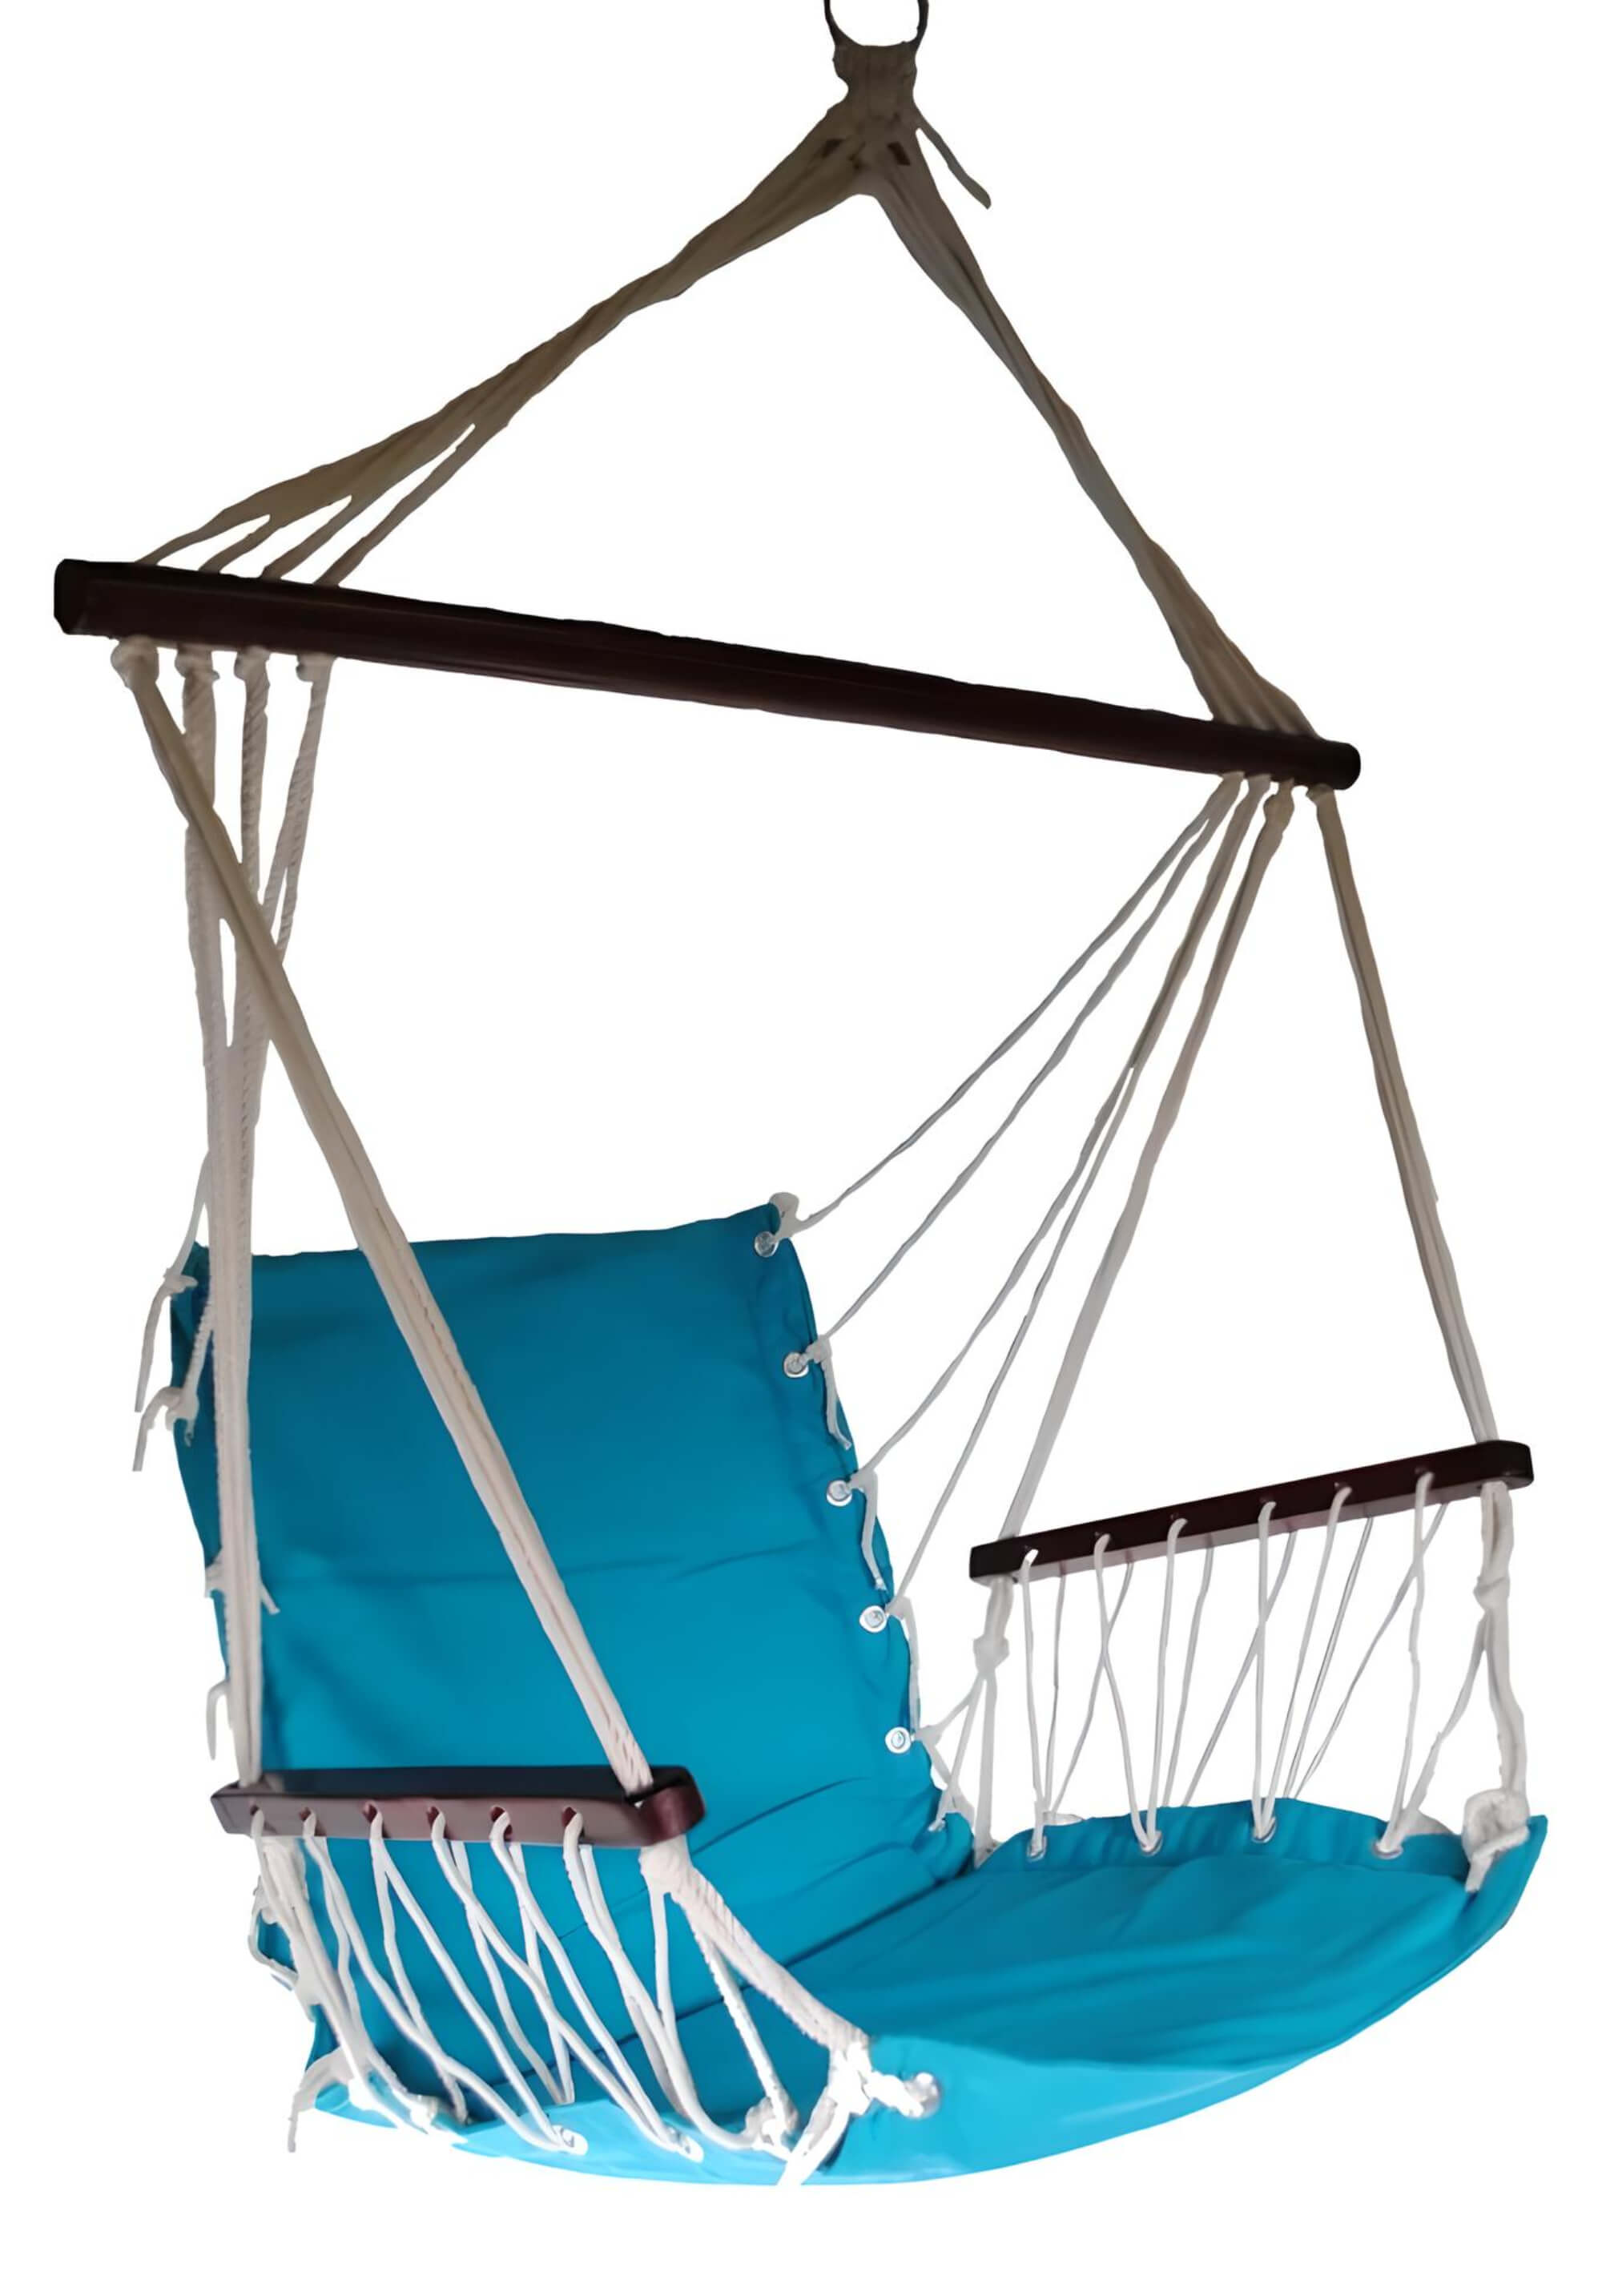 hanging-hammock-chair-with-wooden-armrests-Sky-blue-colour